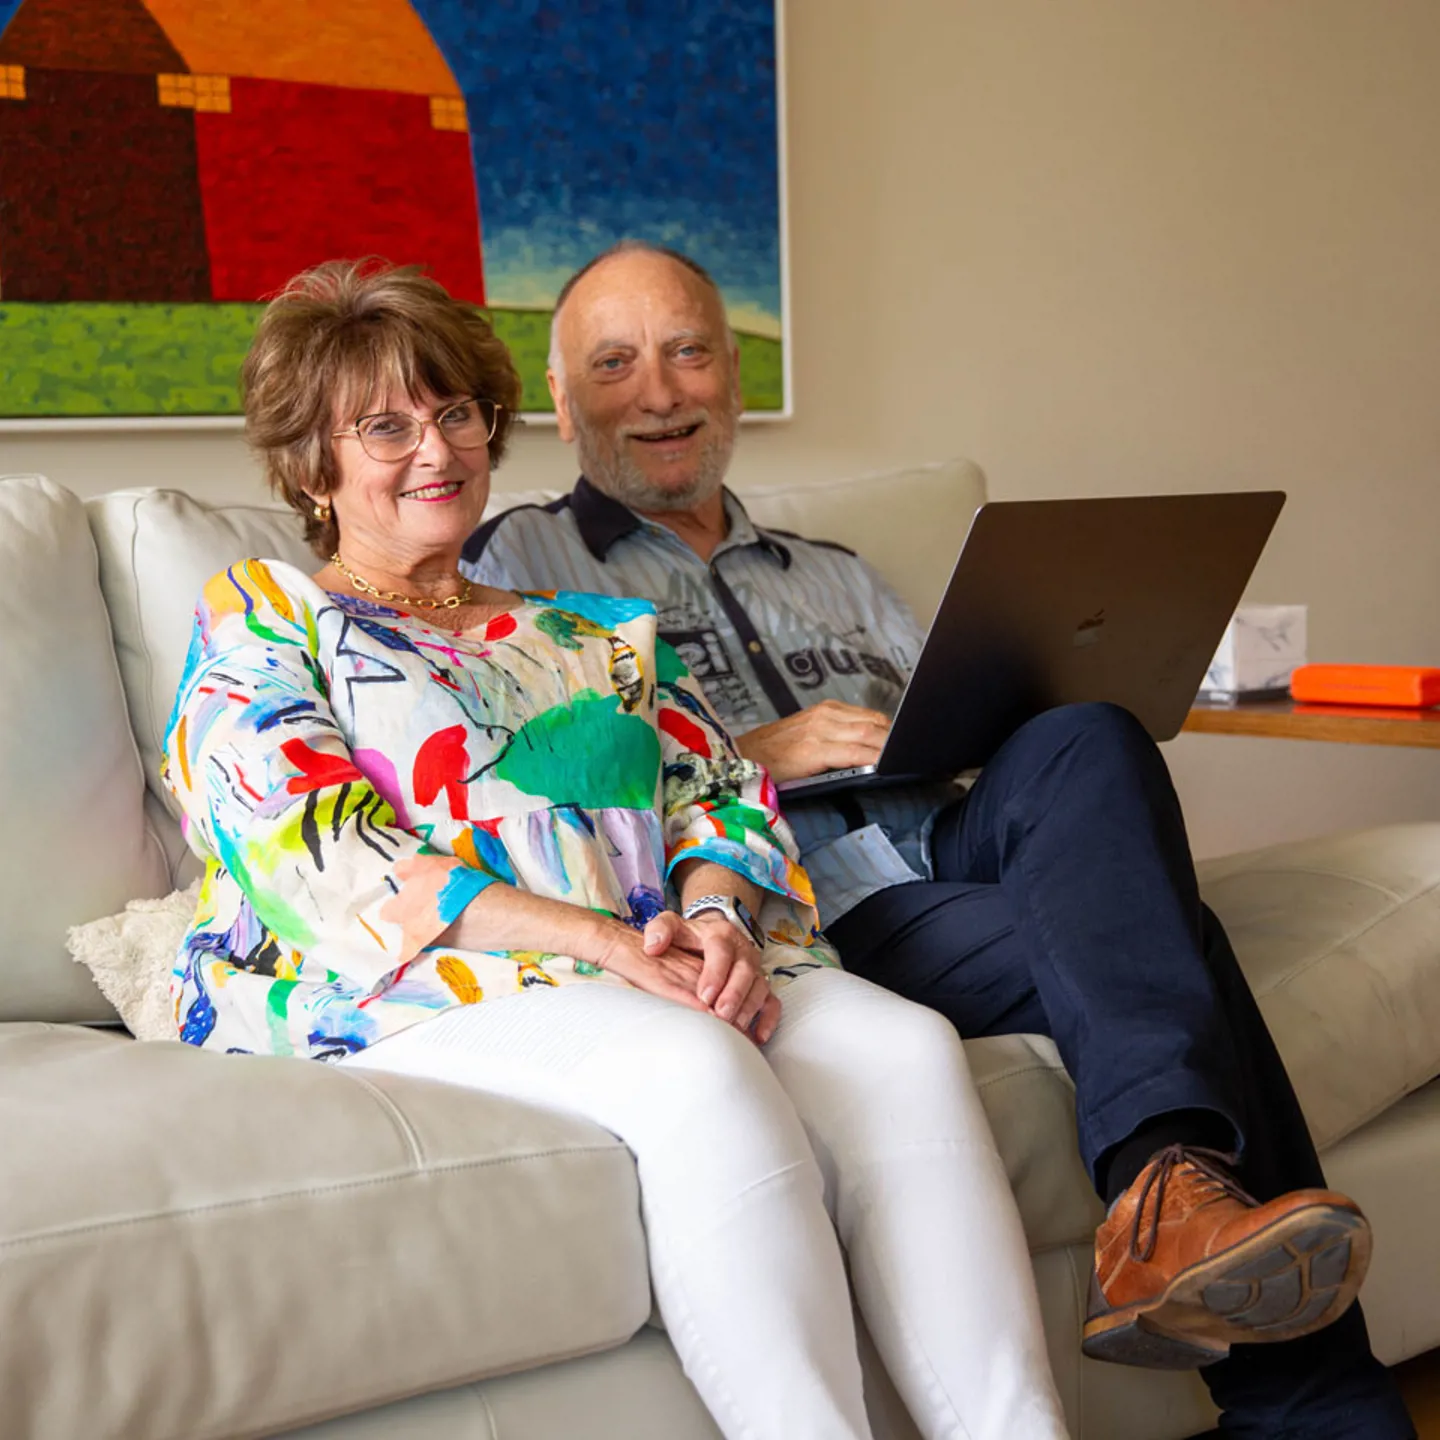 Man and woman sitting on a couch with a laptop in the man's lap